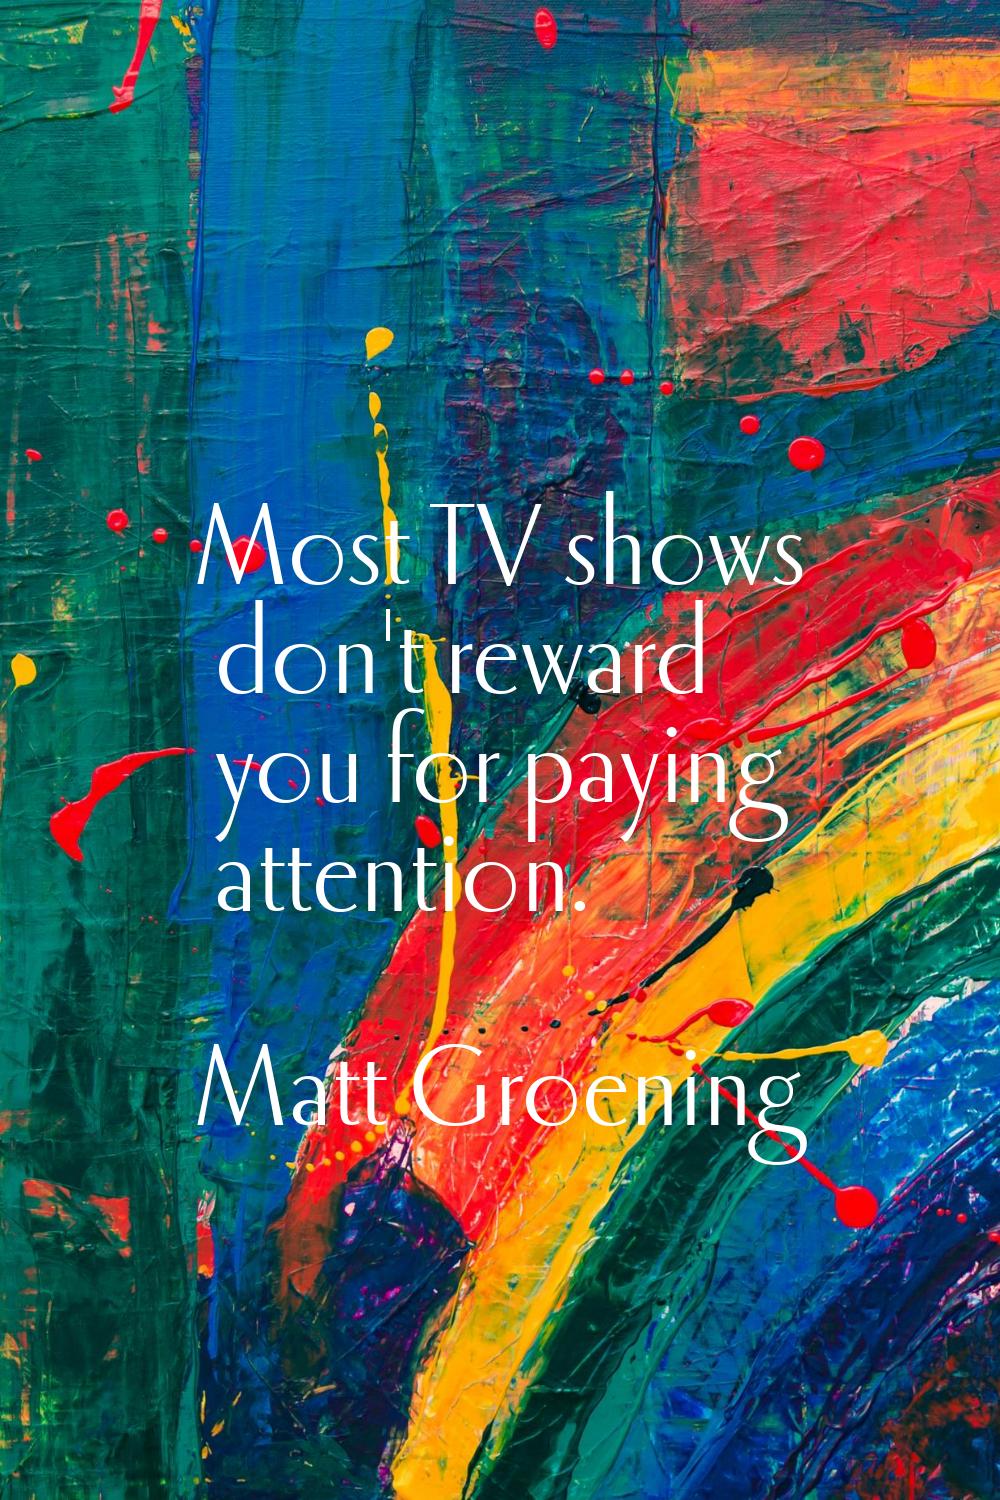 Most TV shows don't reward you for paying attention.